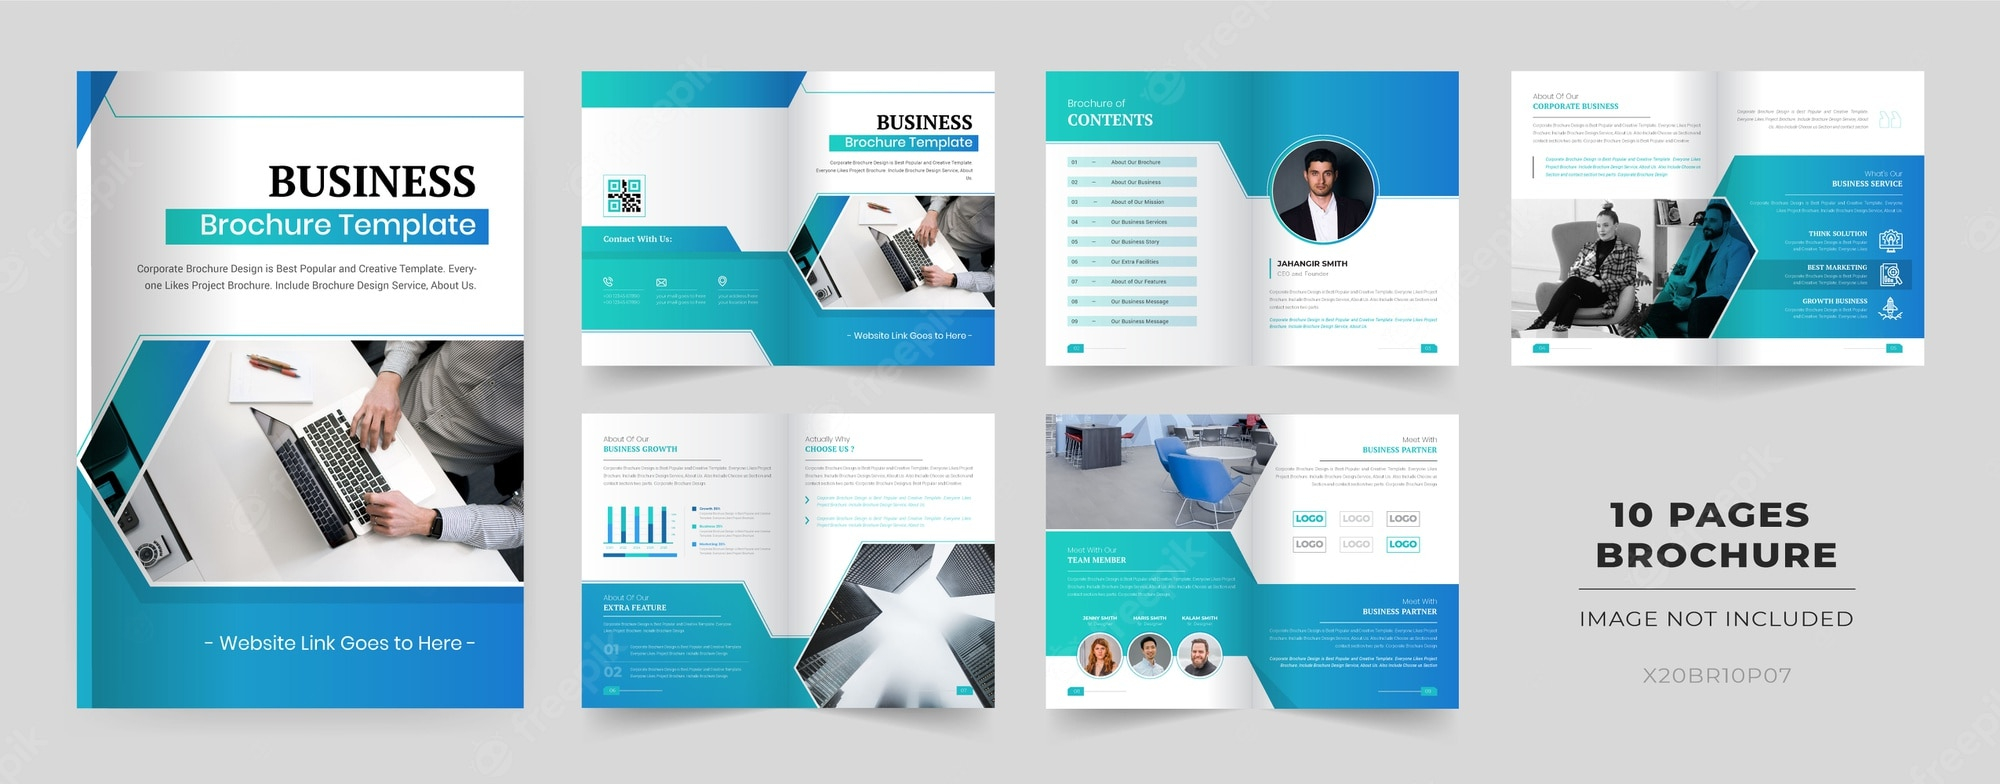 Brochure template Vectors & Illustrations for Free Download  Freepik Within Ai Brochure Templates Free Download